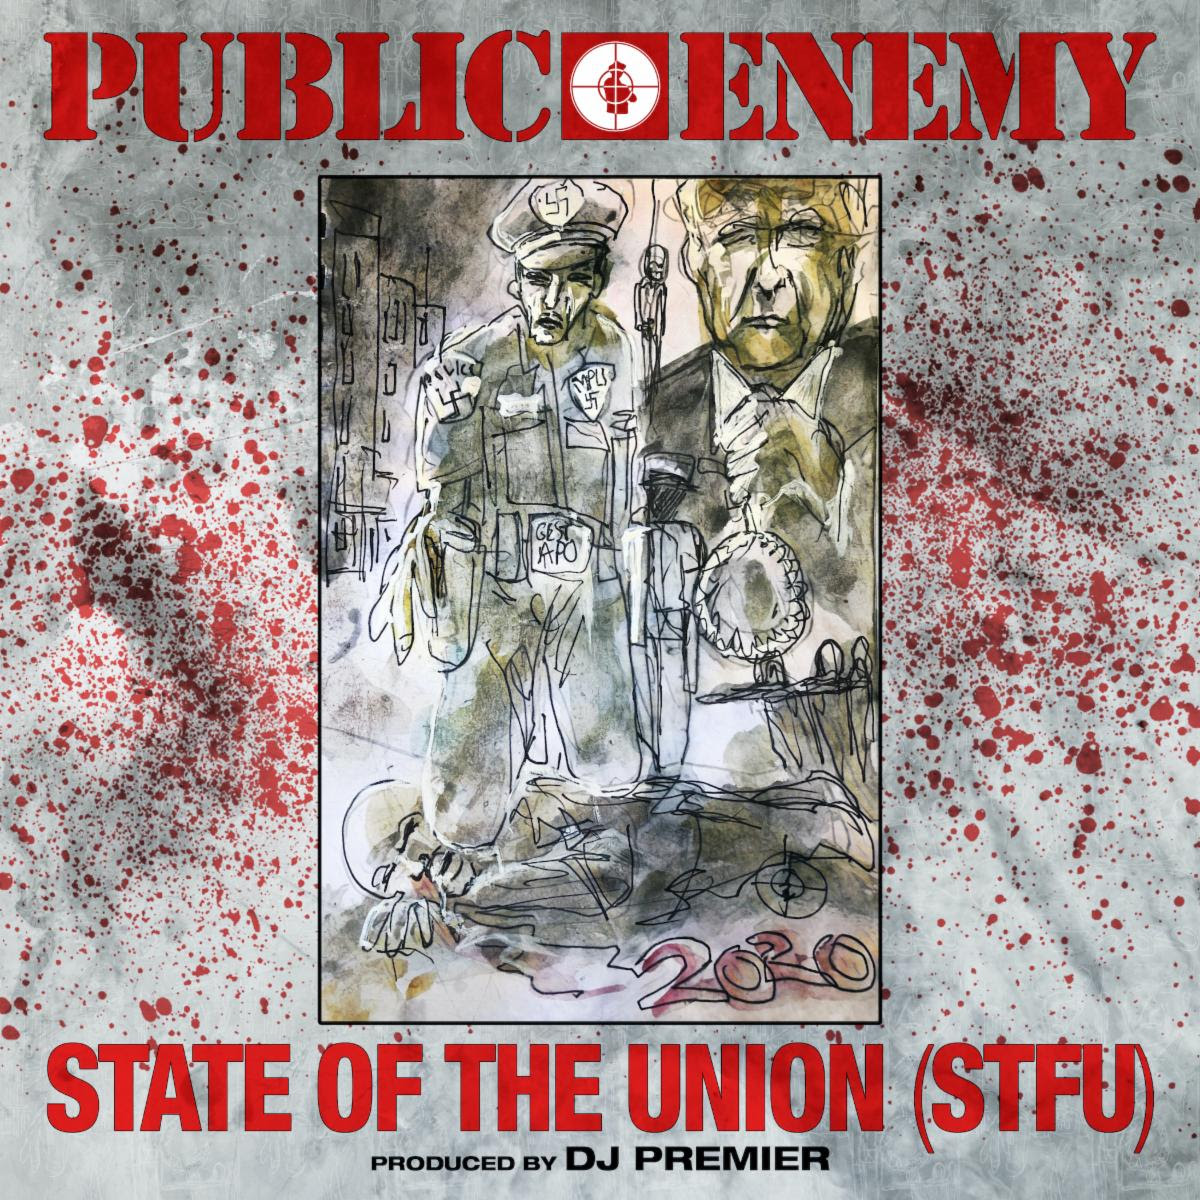 State_of_the_union__stfu__public_enemy